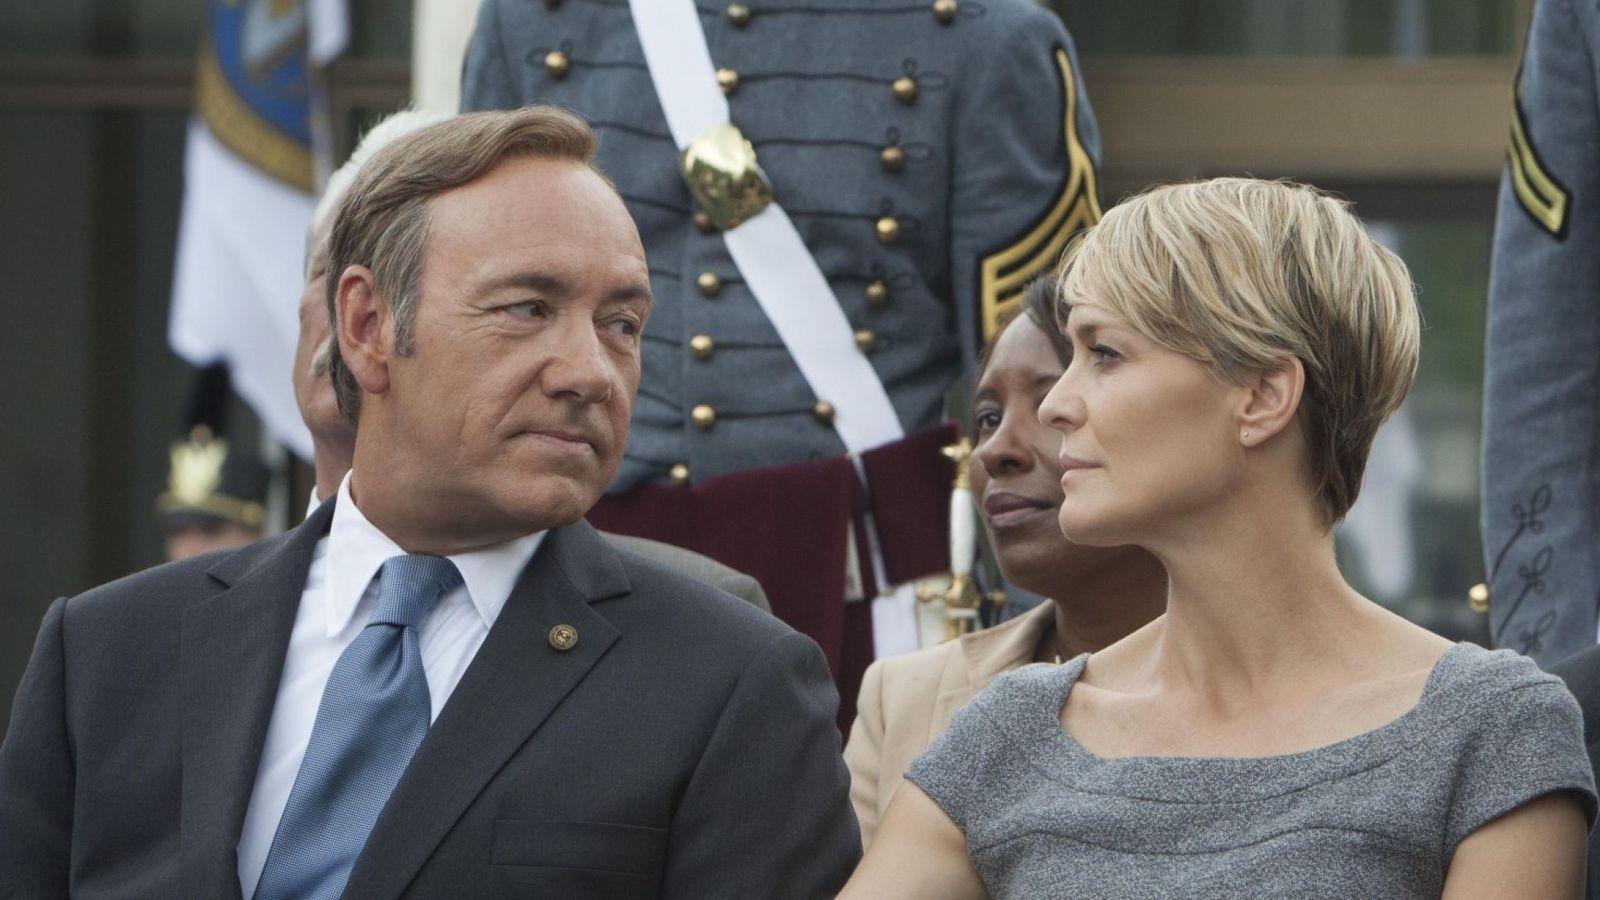 House of Cards to return in 2018 without Kevin Spacey